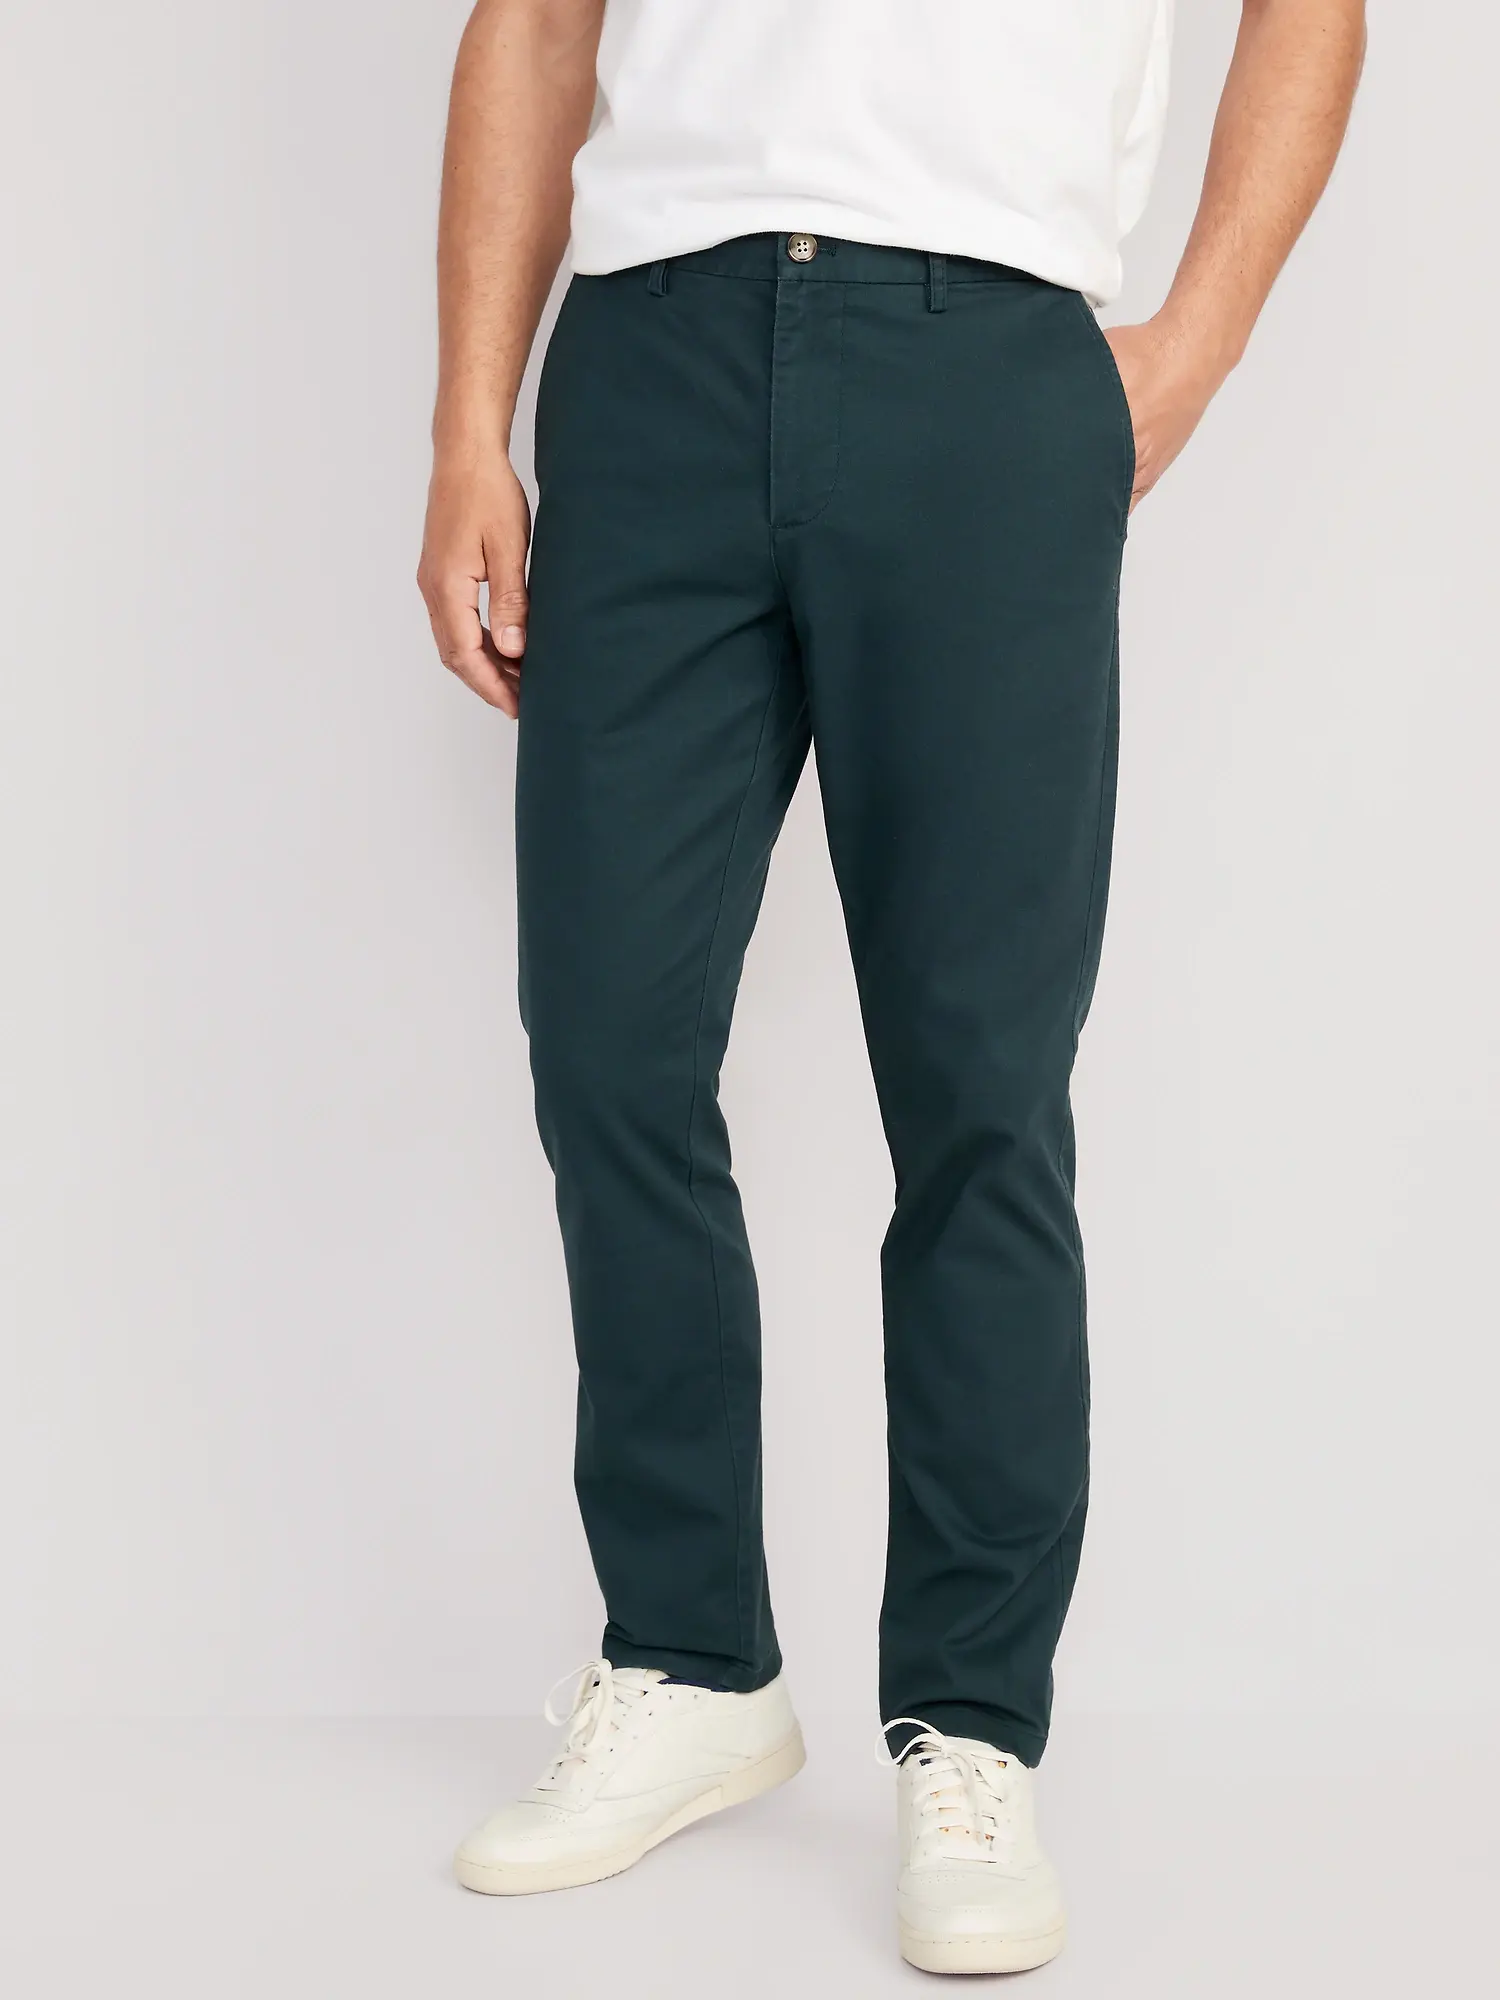 Old Navy Slim Built-In Flex Rotation Chino Pants green. 1